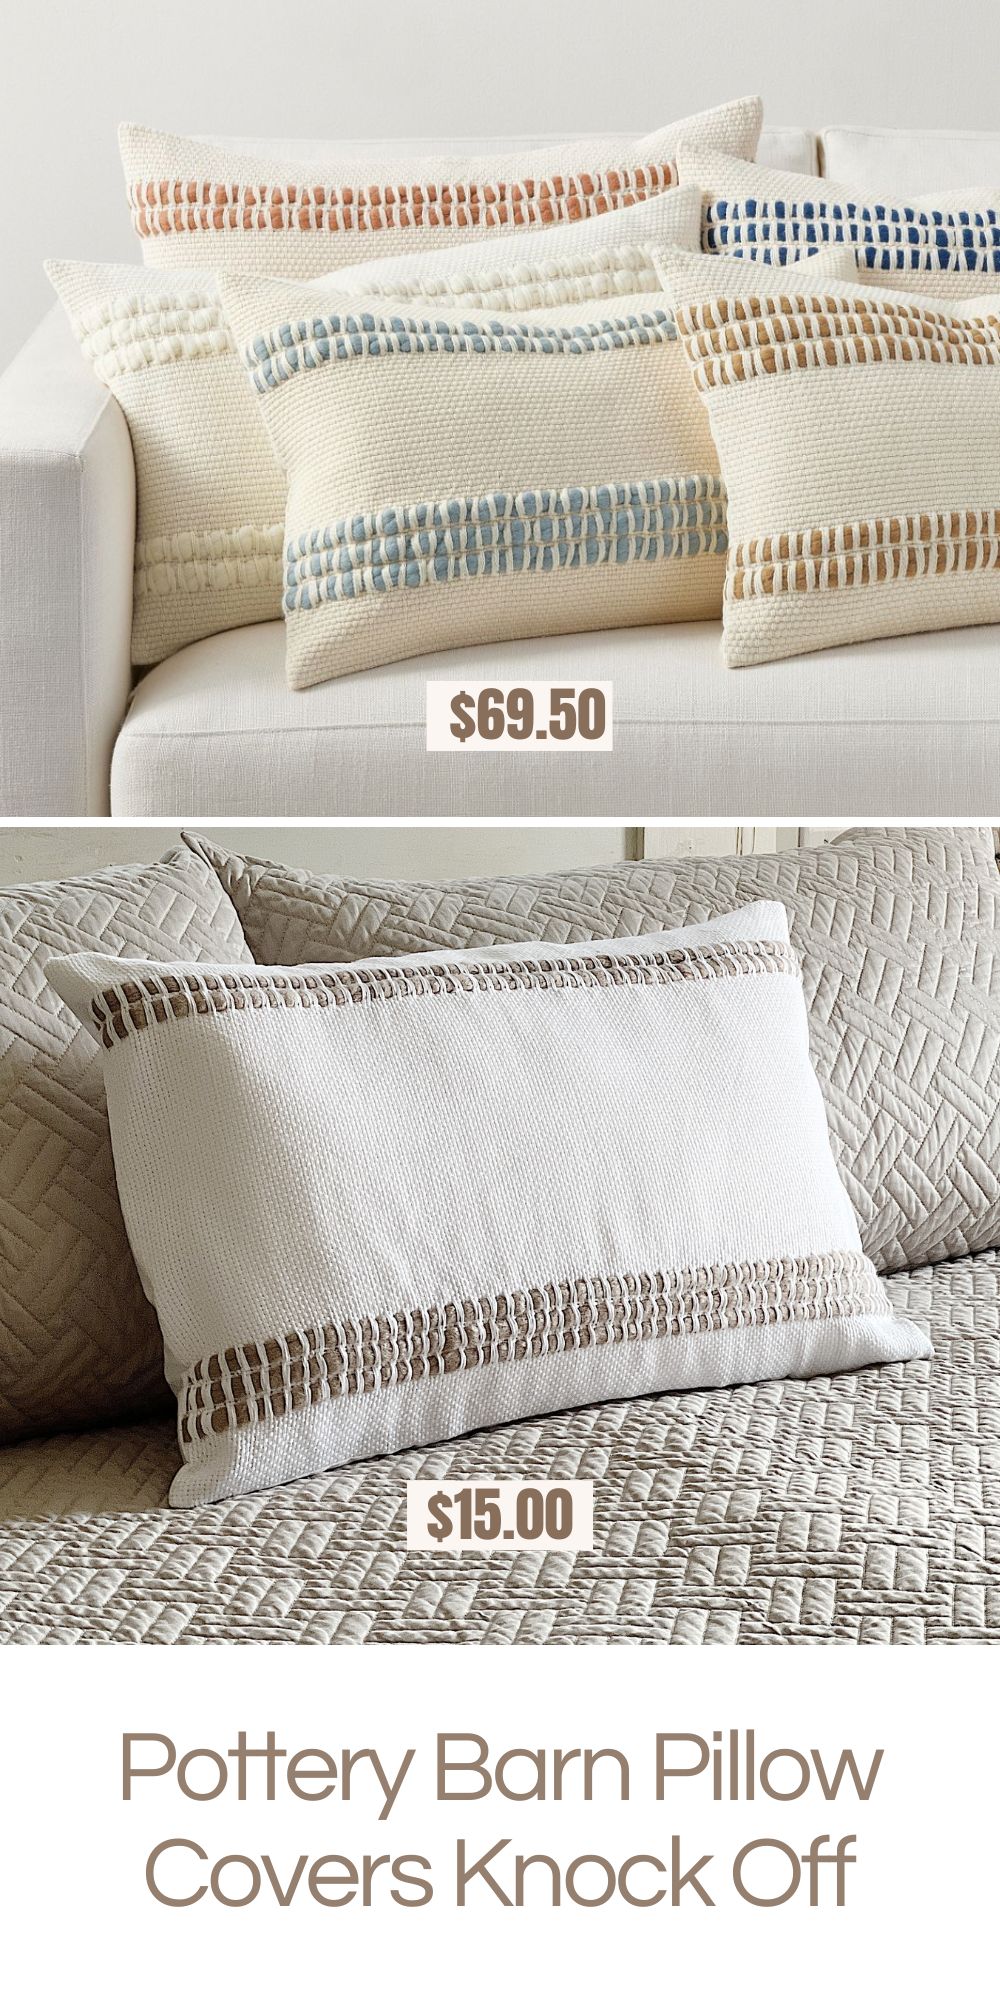 I love everything that Pottery Barn sells, except for their prices. Today I am sharing this amazing Pottery Barn Pillow Covers knock-off!